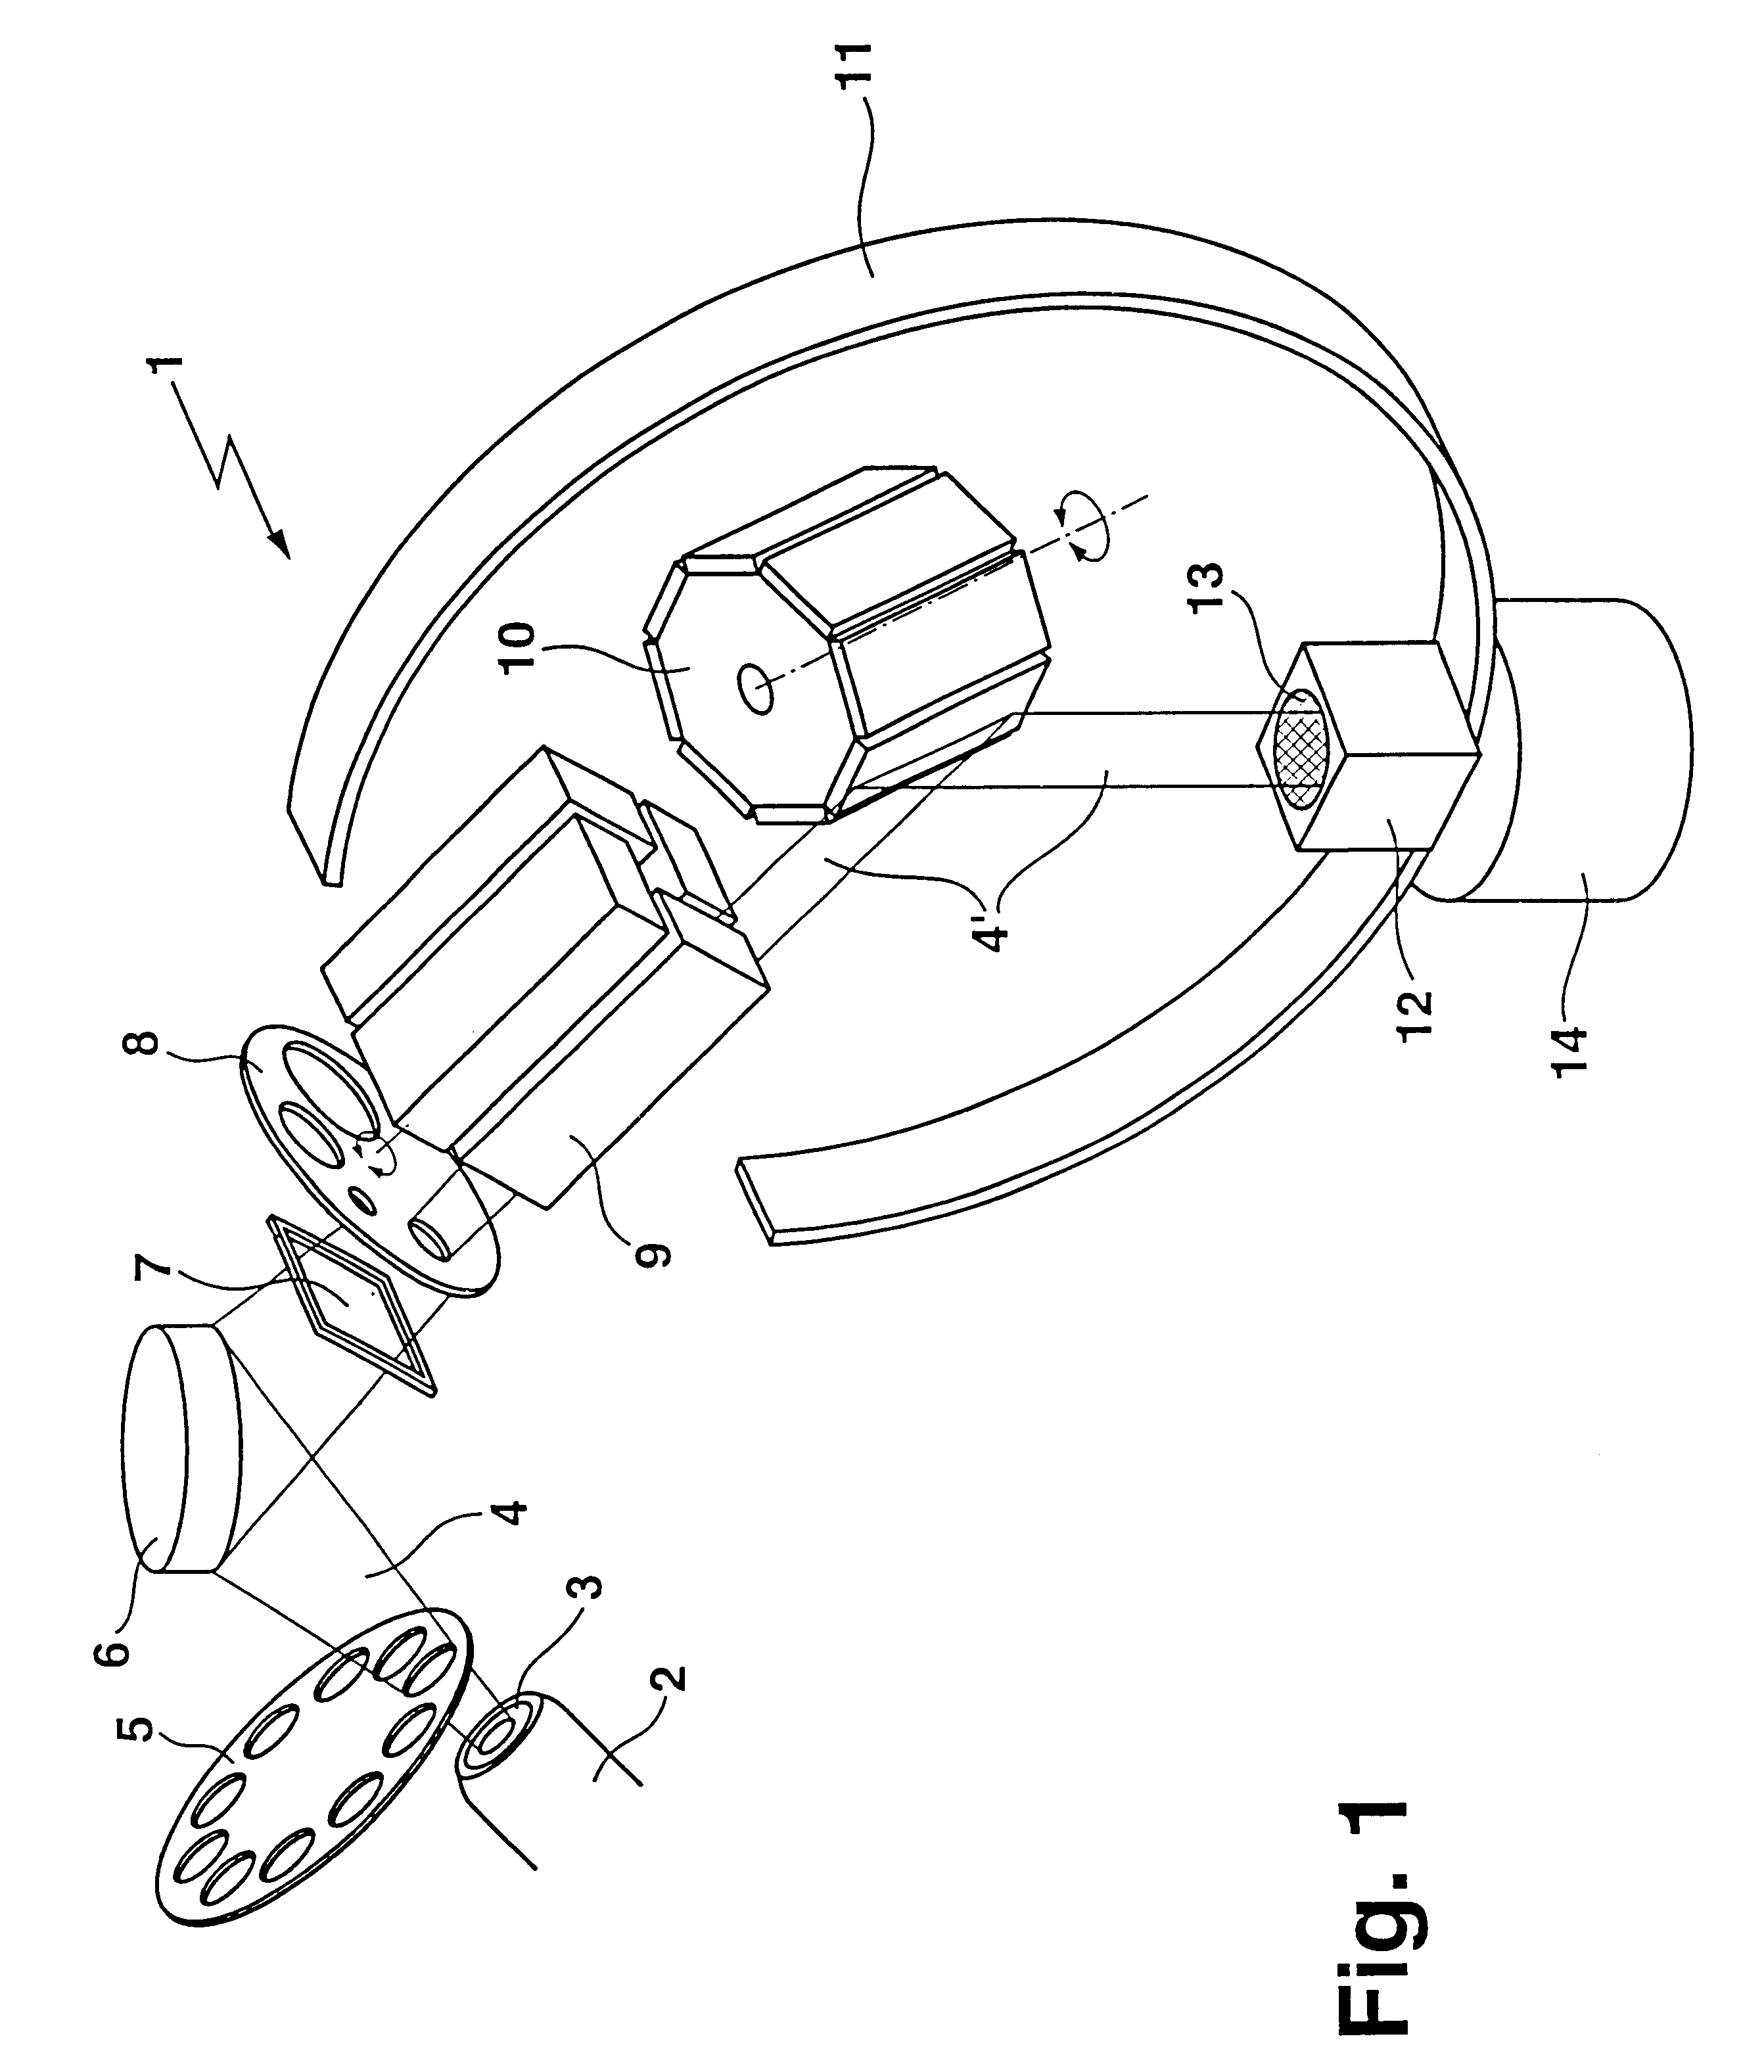 X-ray analysis device with X-ray optical semi-conductor construction element